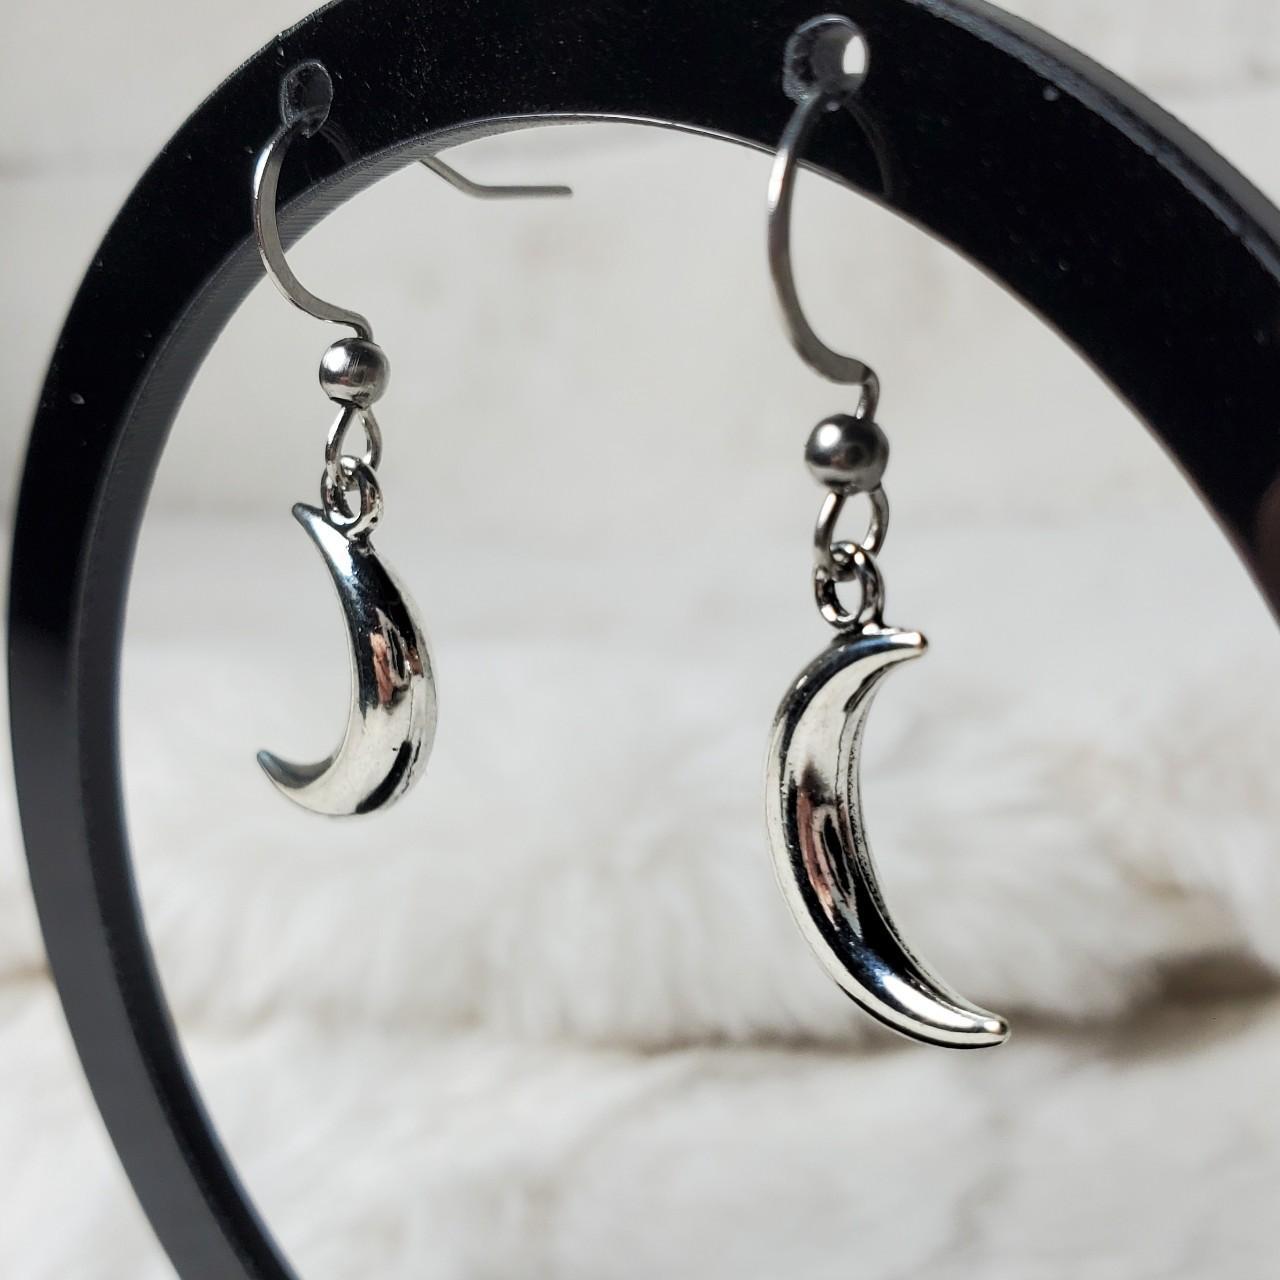 Product Image 2 - Crescent moon earrings. 

These charms